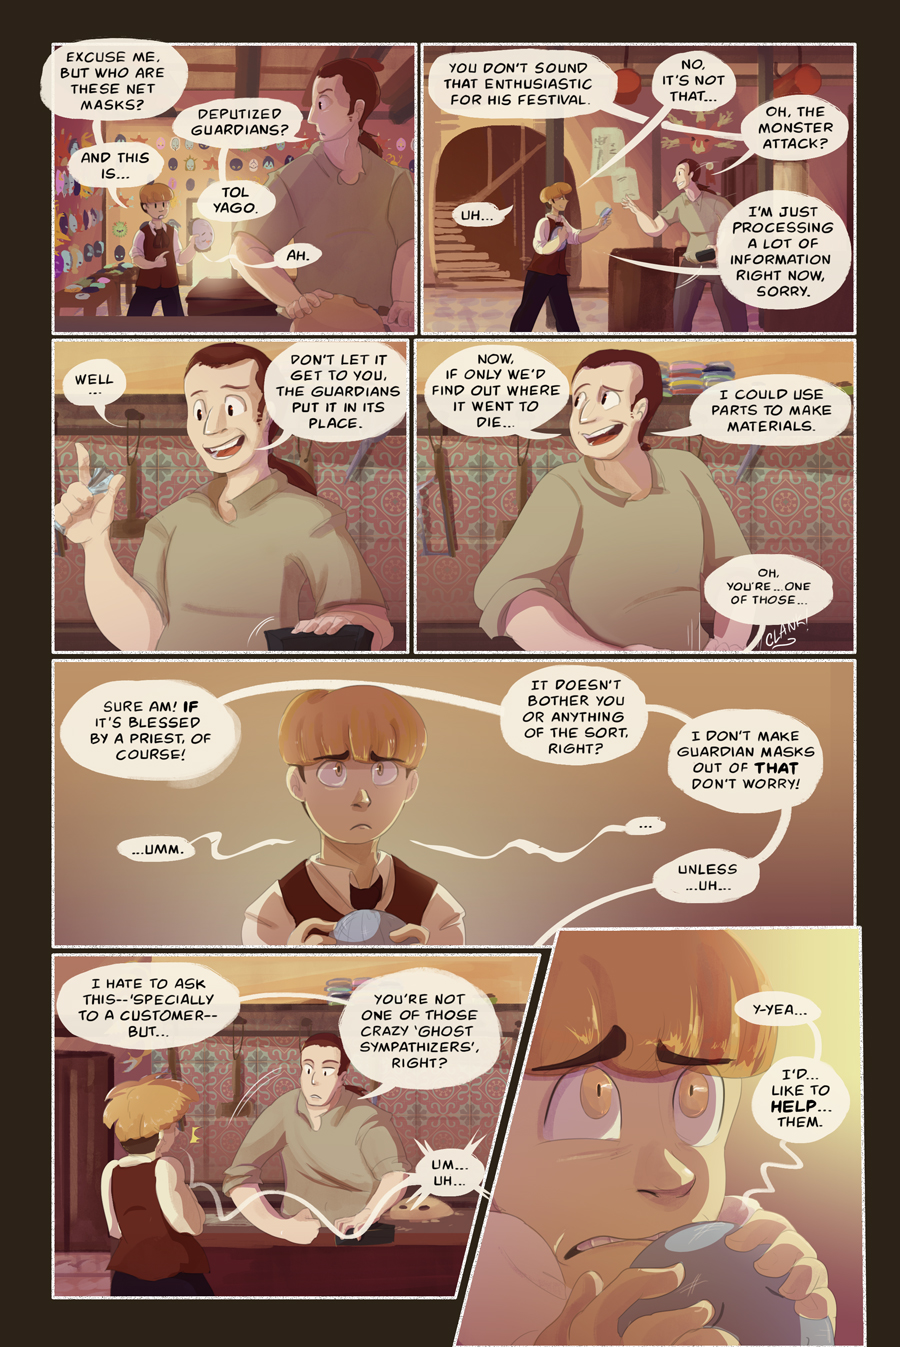 Gone Fishing 003: The Tourist, page 4